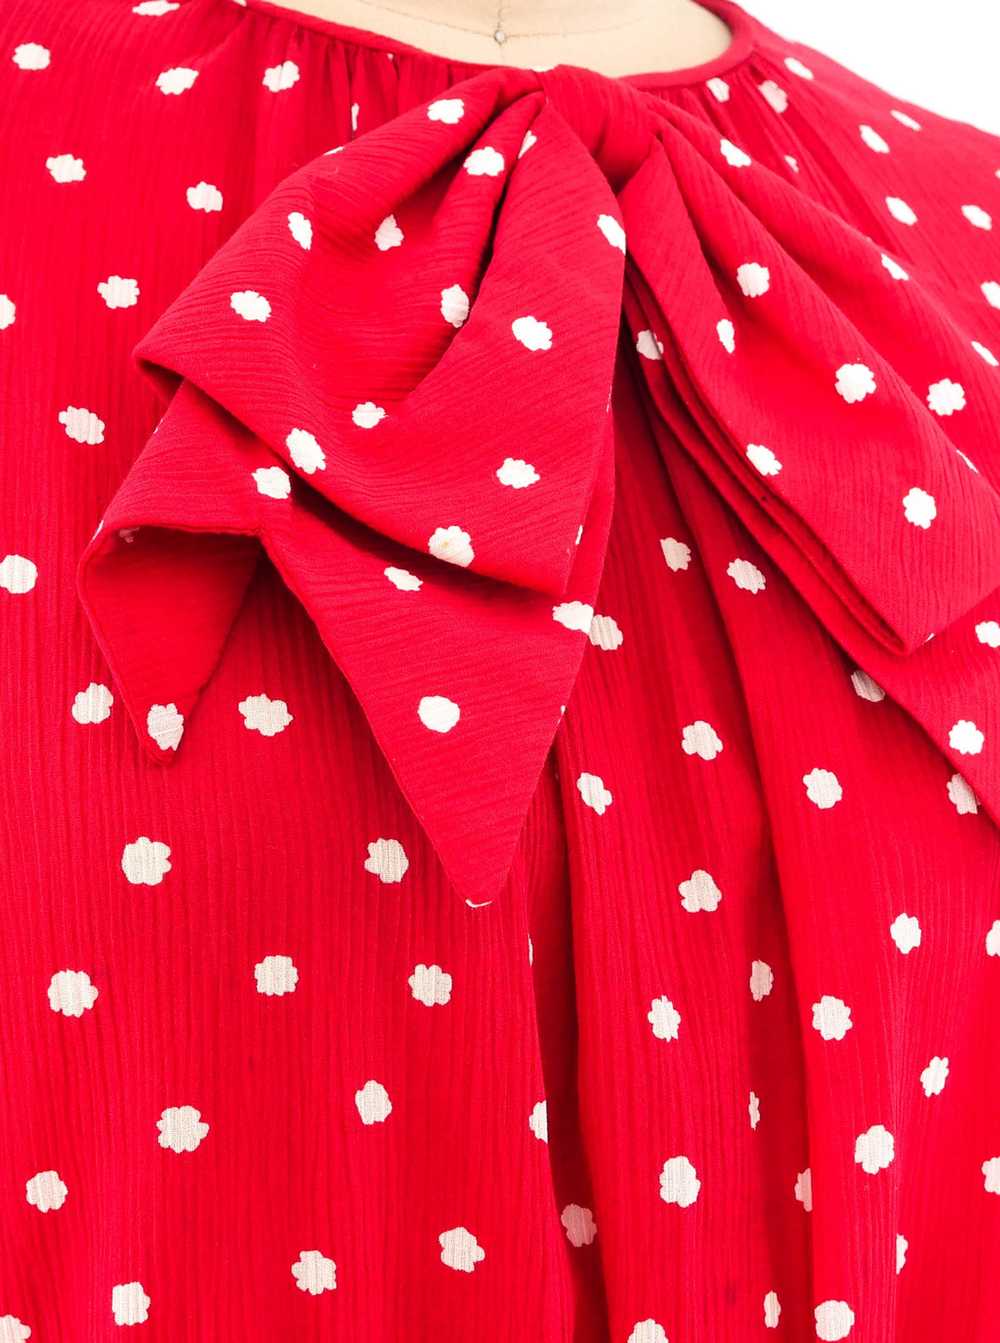 Jean Patou Dotted Red Dress - image 2